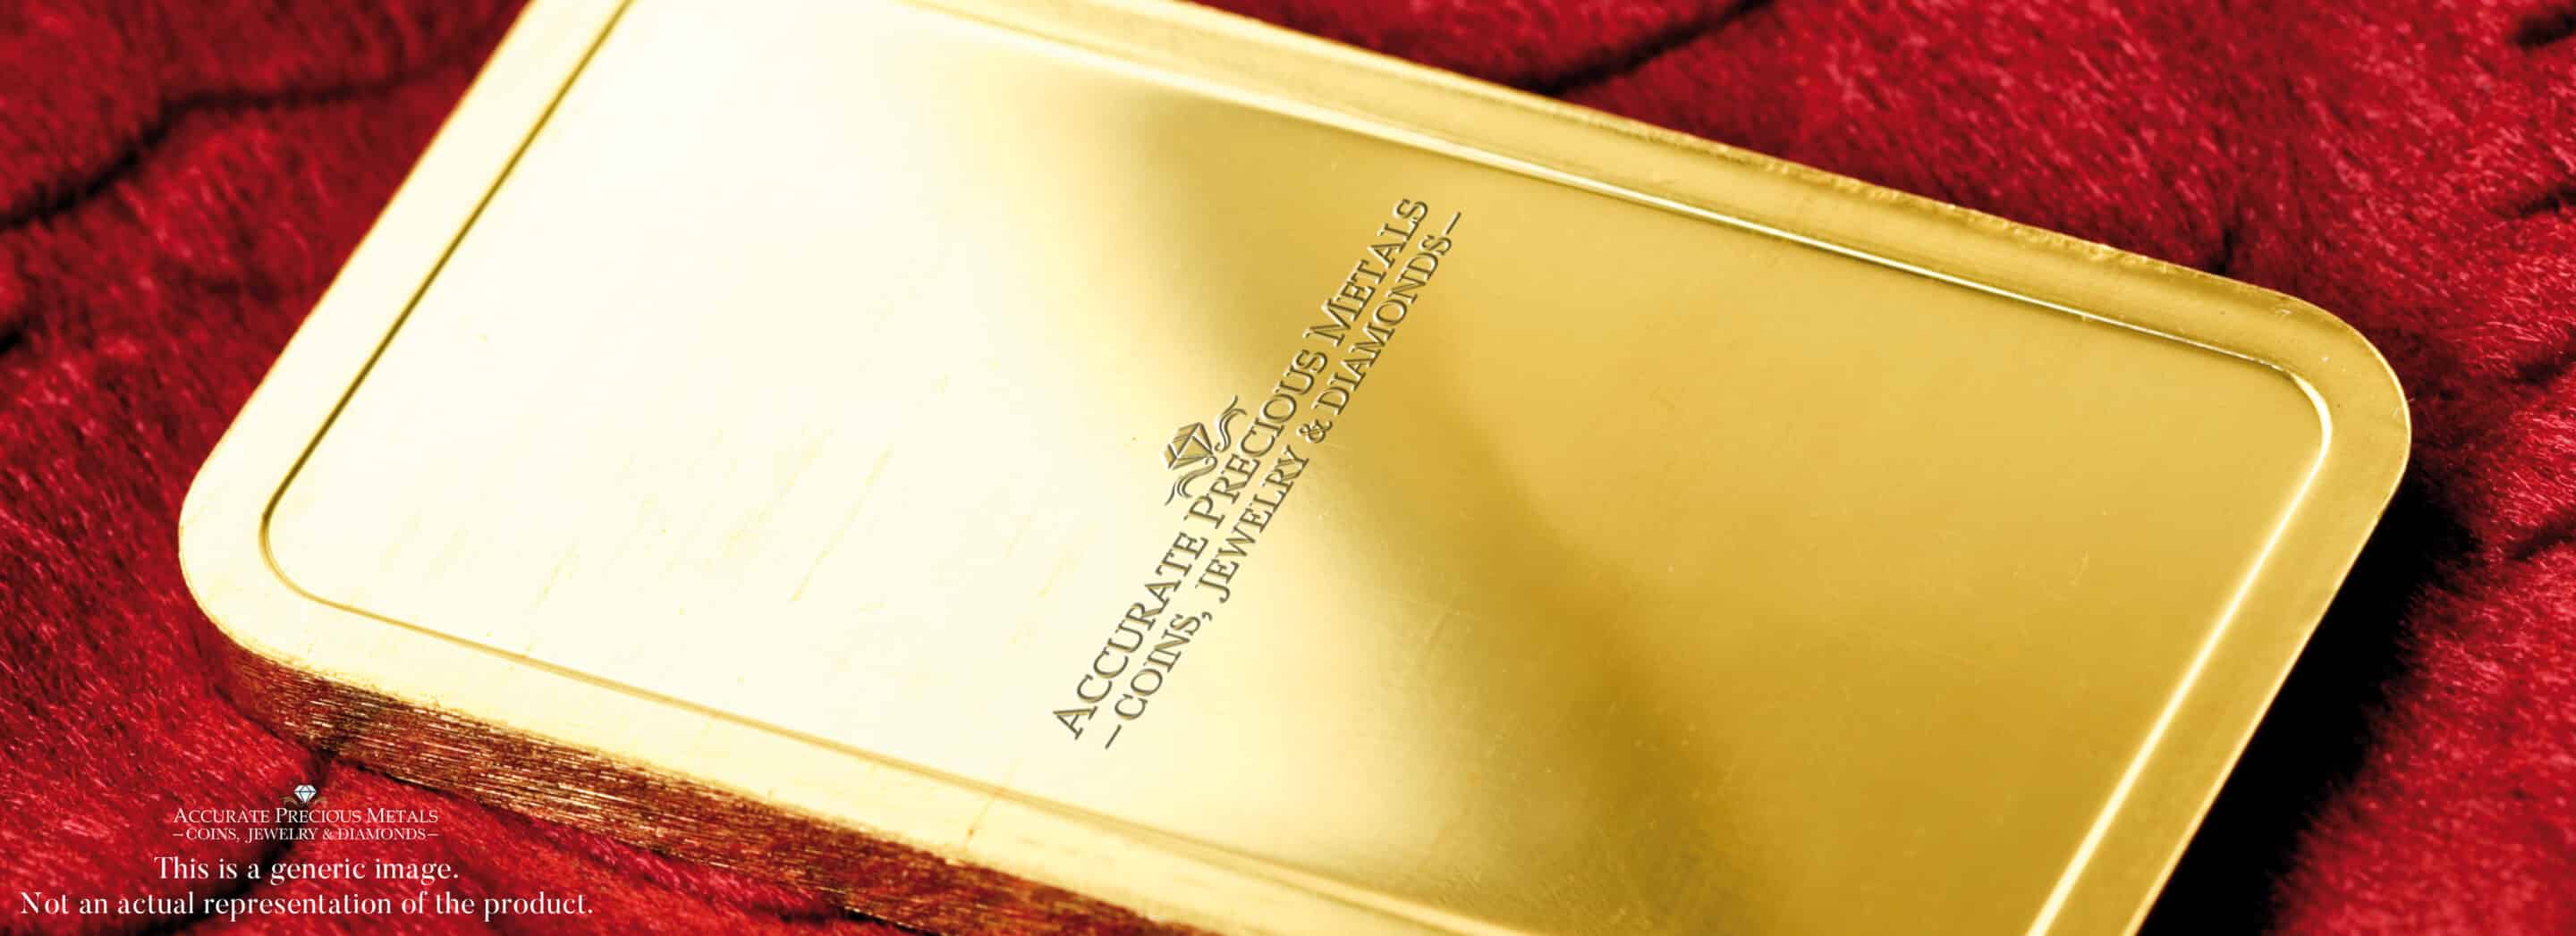 A shiny gold bar with a smooth and reflective surface. The rectangular bar exudes a sense of luxury and wealth. Its lustrous appearance represents the timeless allure of gold as a valuable and precious metal.